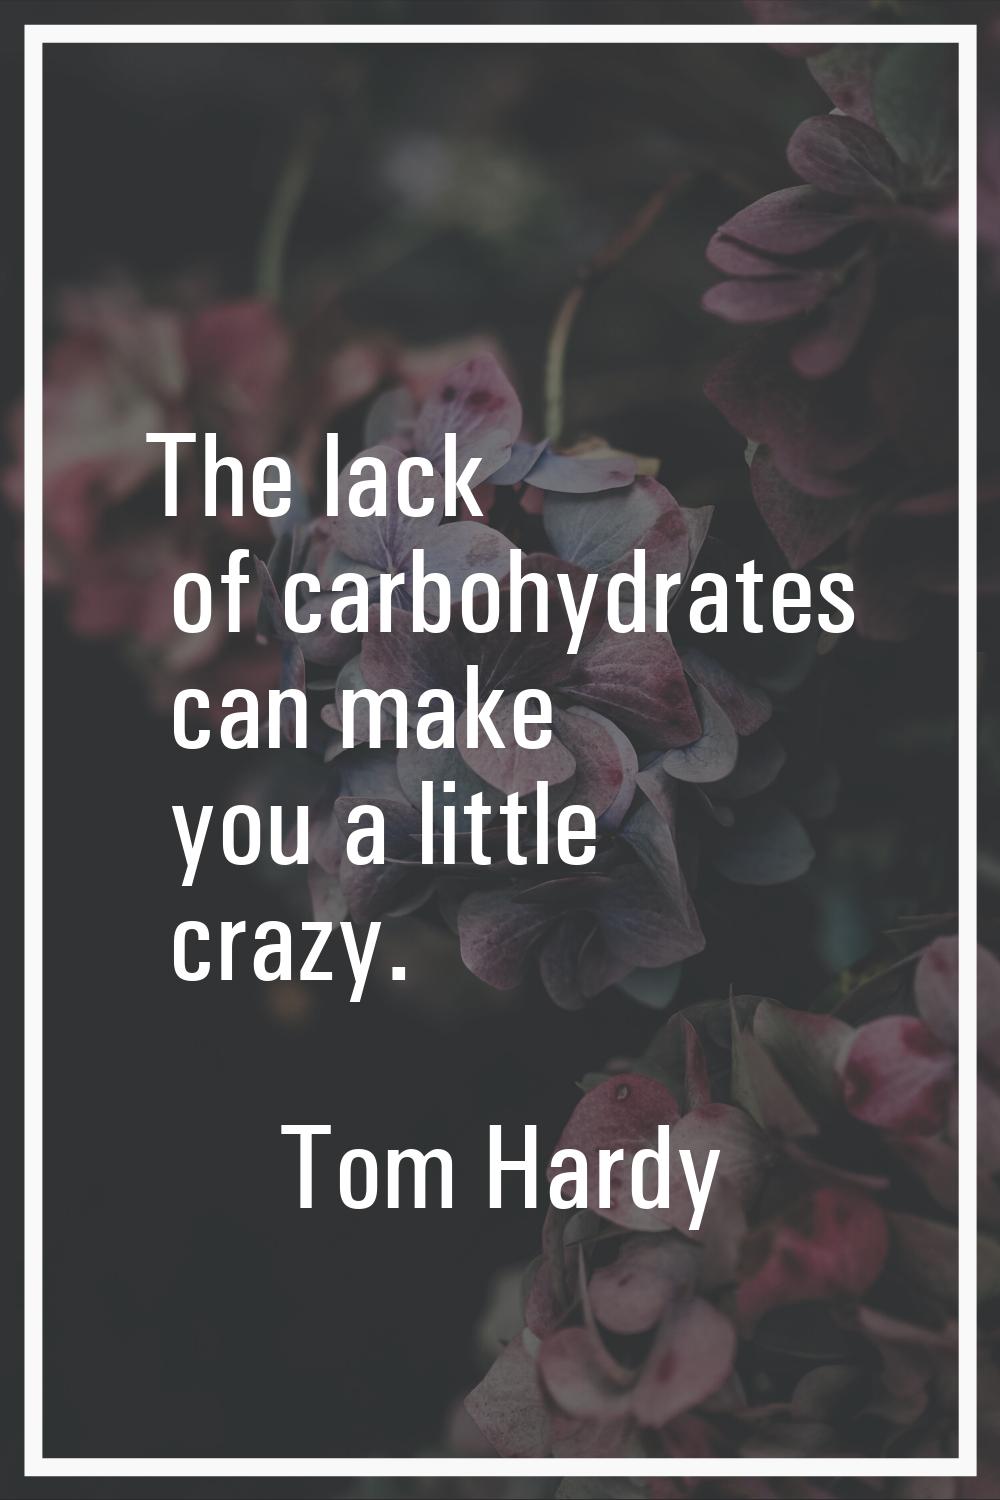 The lack of carbohydrates can make you a little crazy.